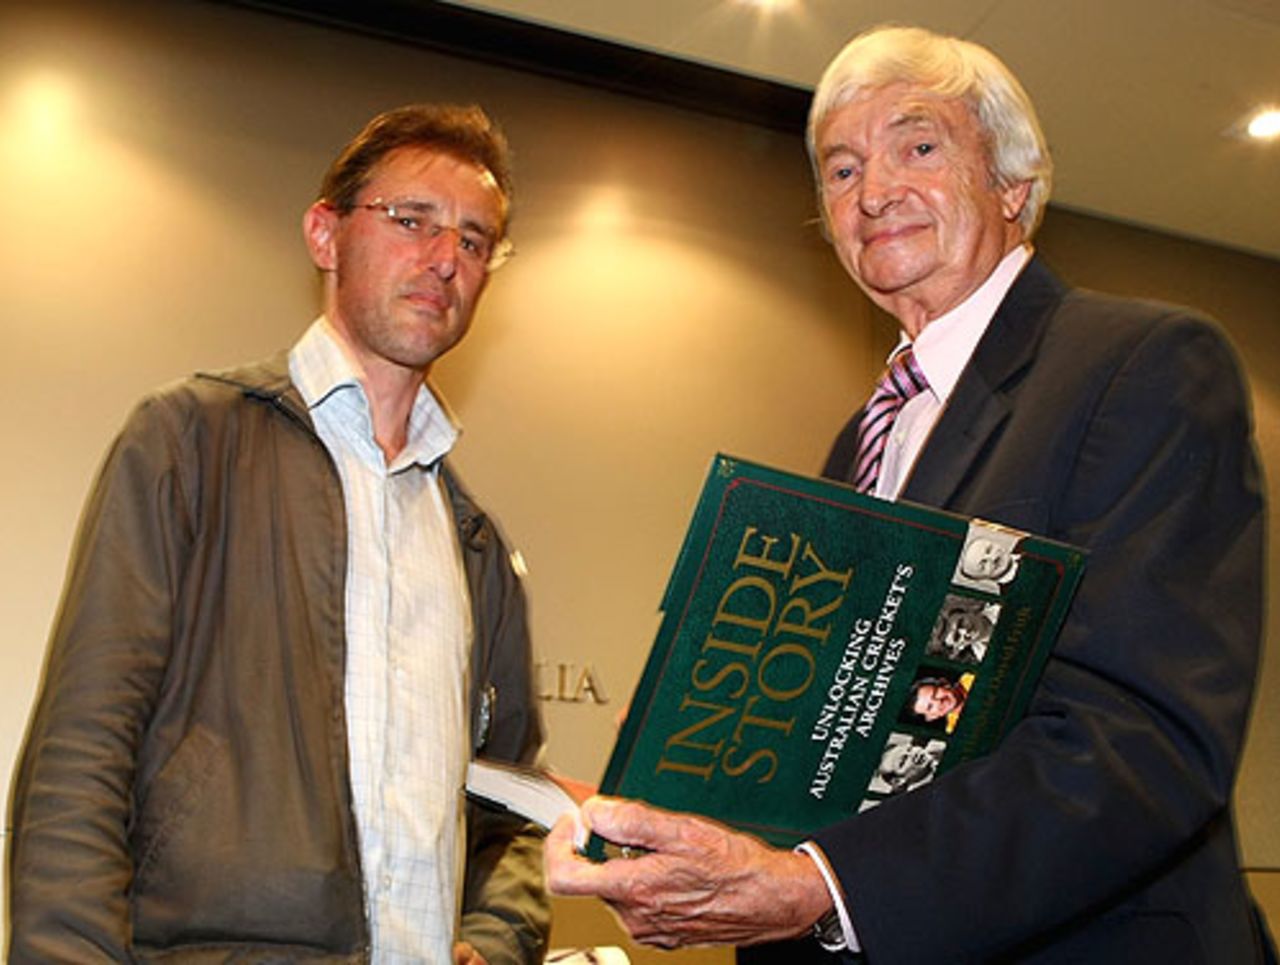 Gideon Haigh and Richie Benaud at the launch of <i>Inside Cricket: Unlocking Australian Cricket's Archives</i>, Melbourne, October 22, 2007